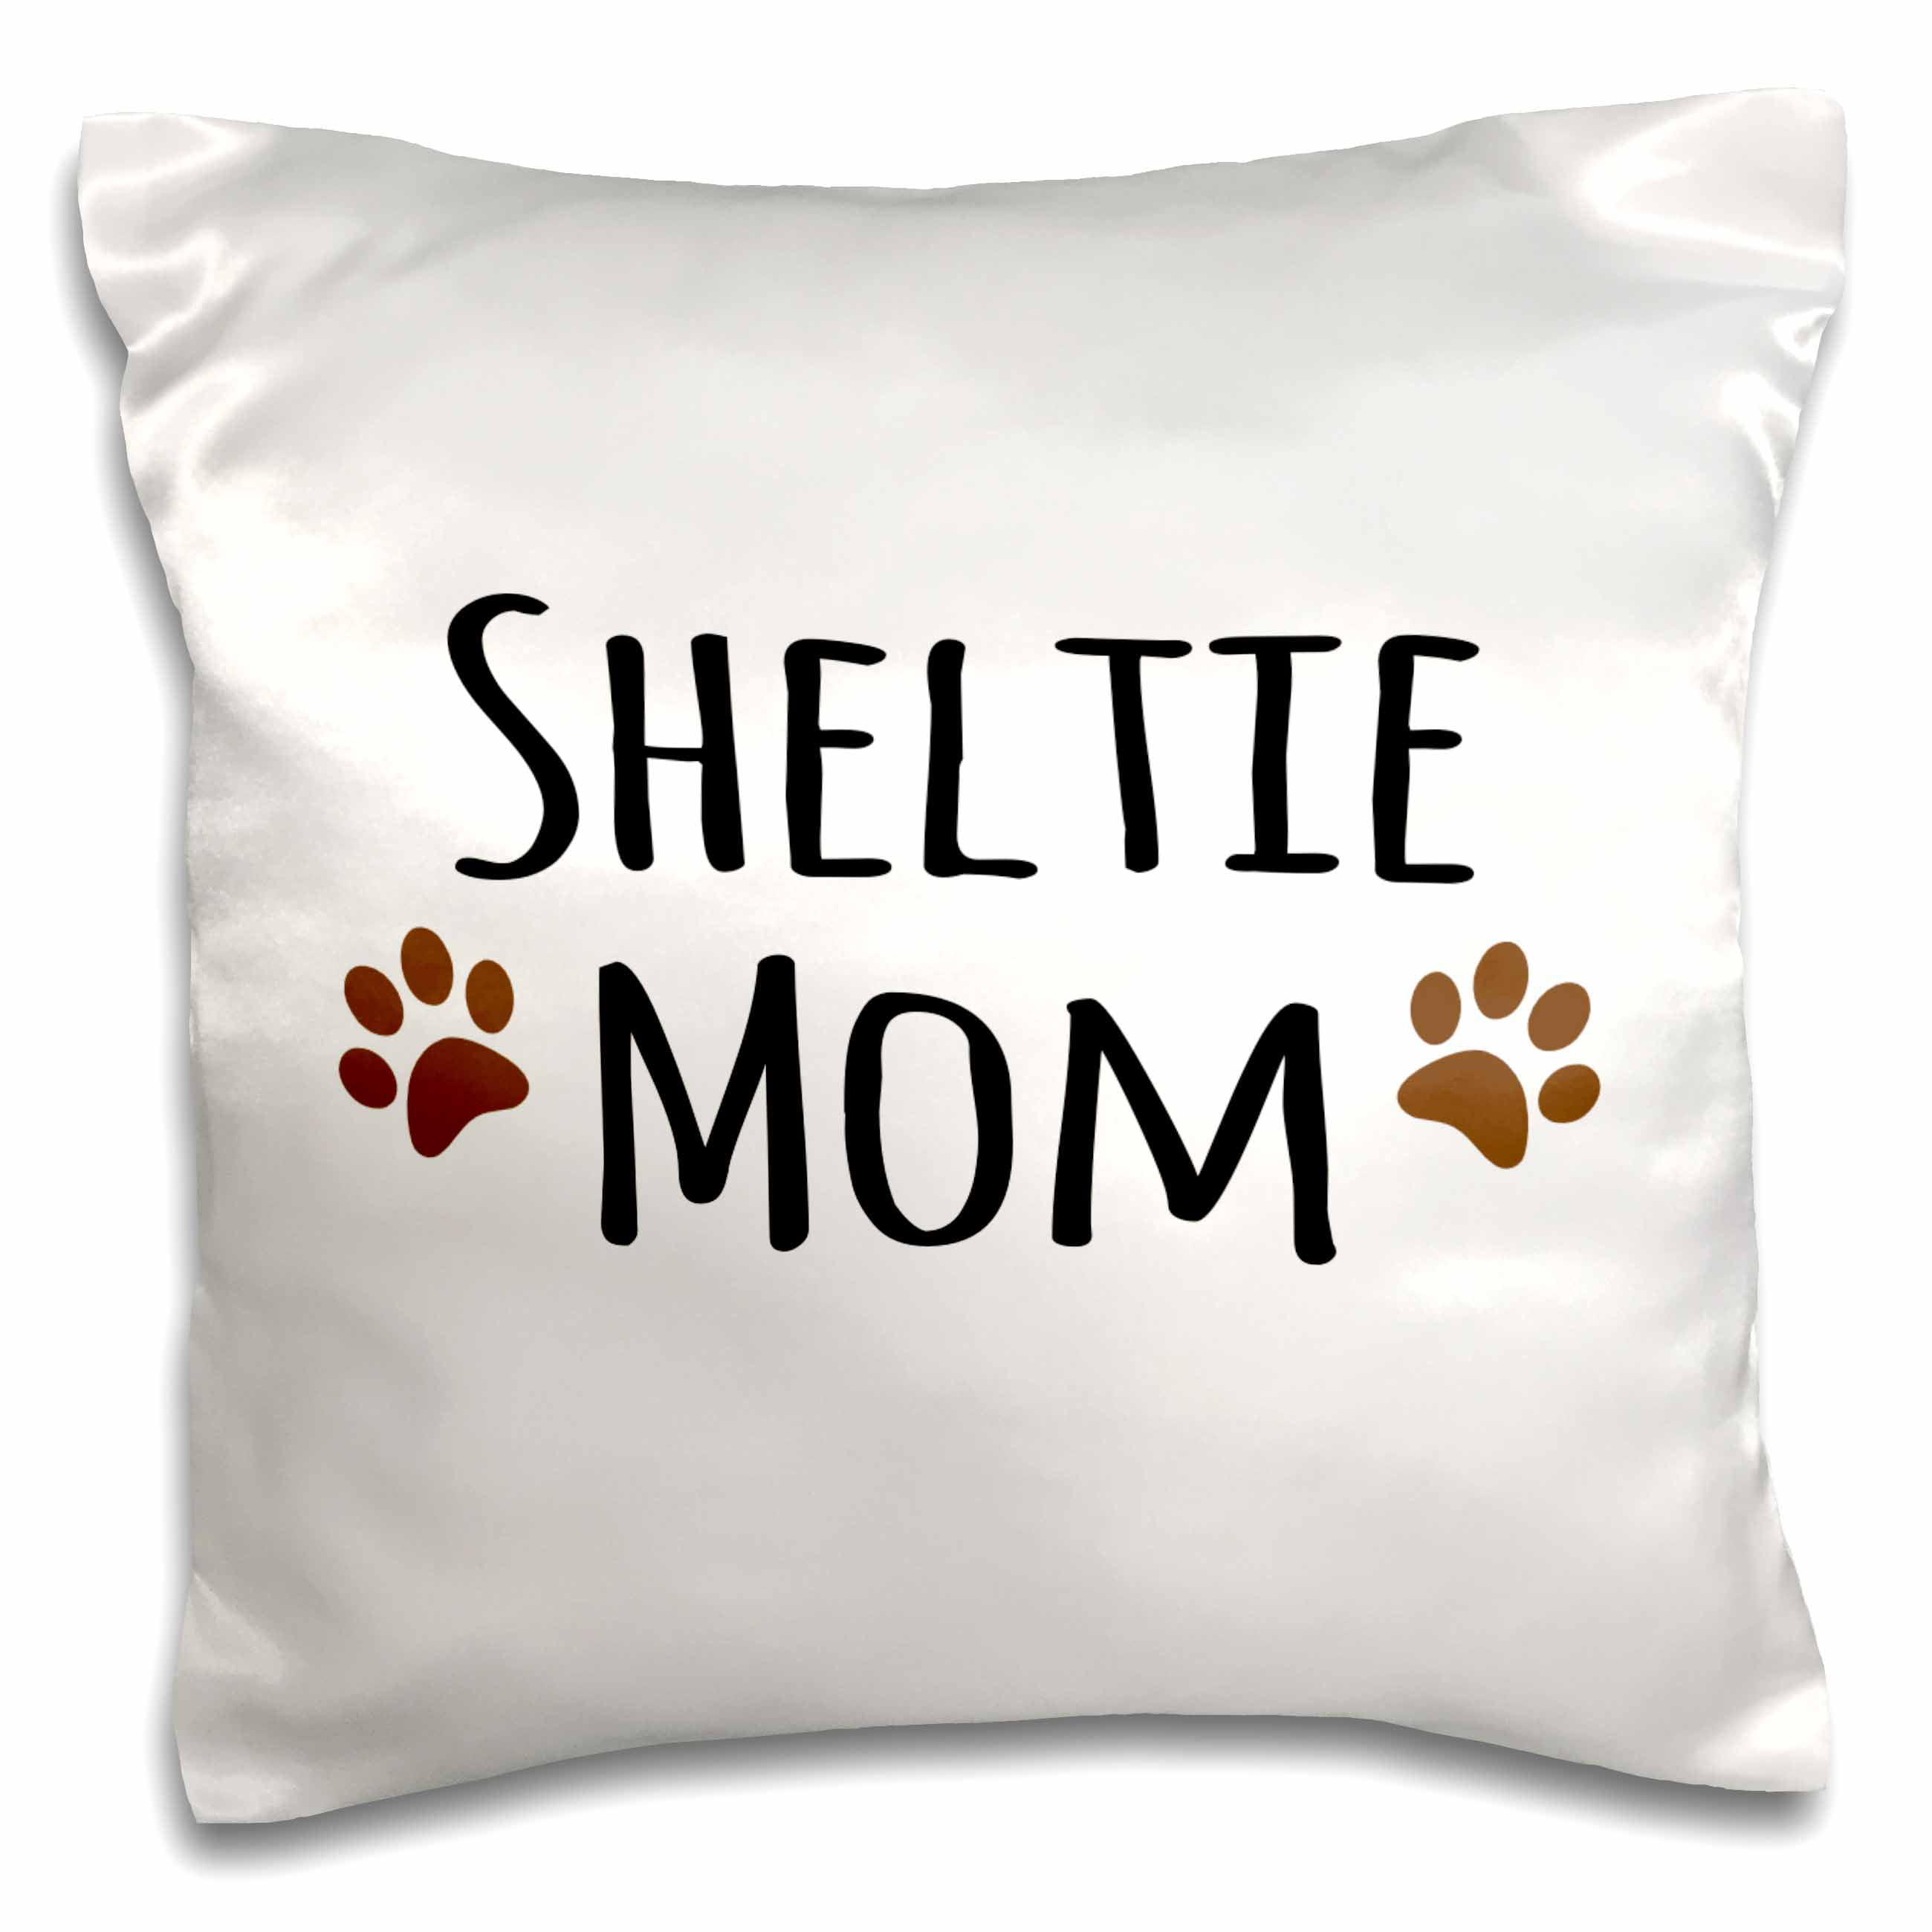 Cute Sheltie Pillowcase Dog Lover Gifts Sheltie Owner Gifts In a Relationship with my Sheltie Sheltie Mom Pillowcase Dog Owner Pillow